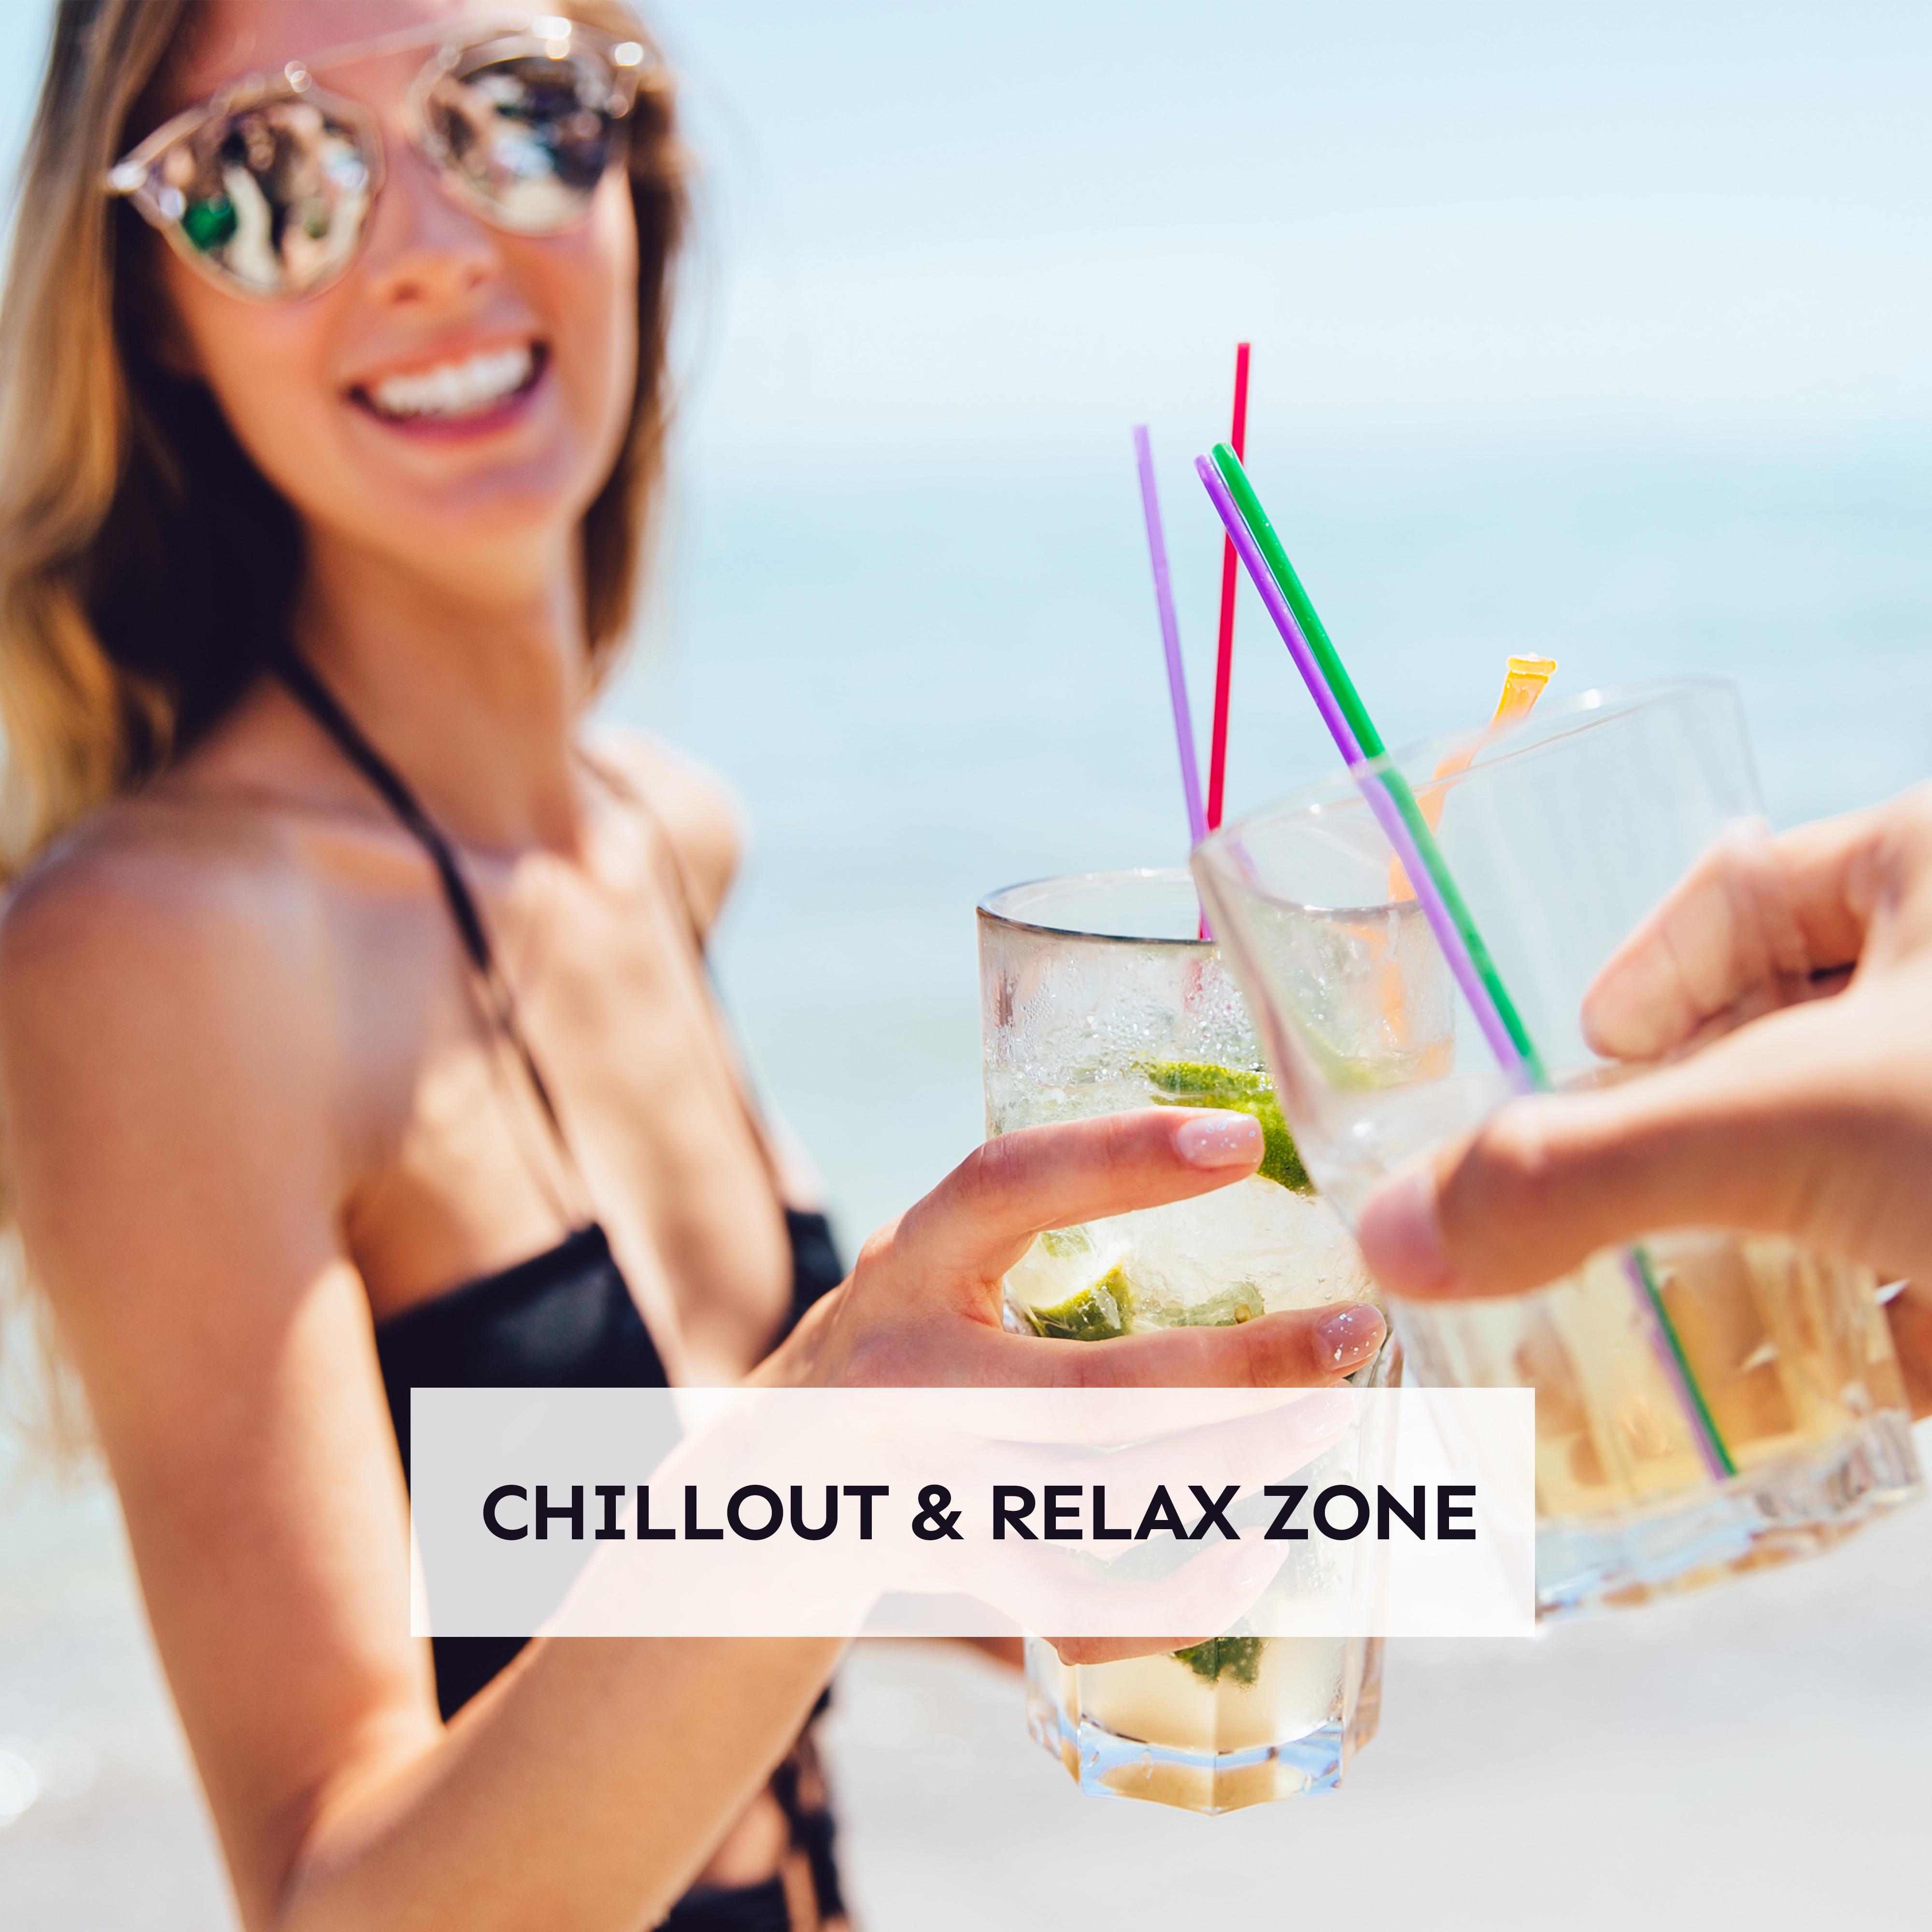 Chillout & Relax Zone